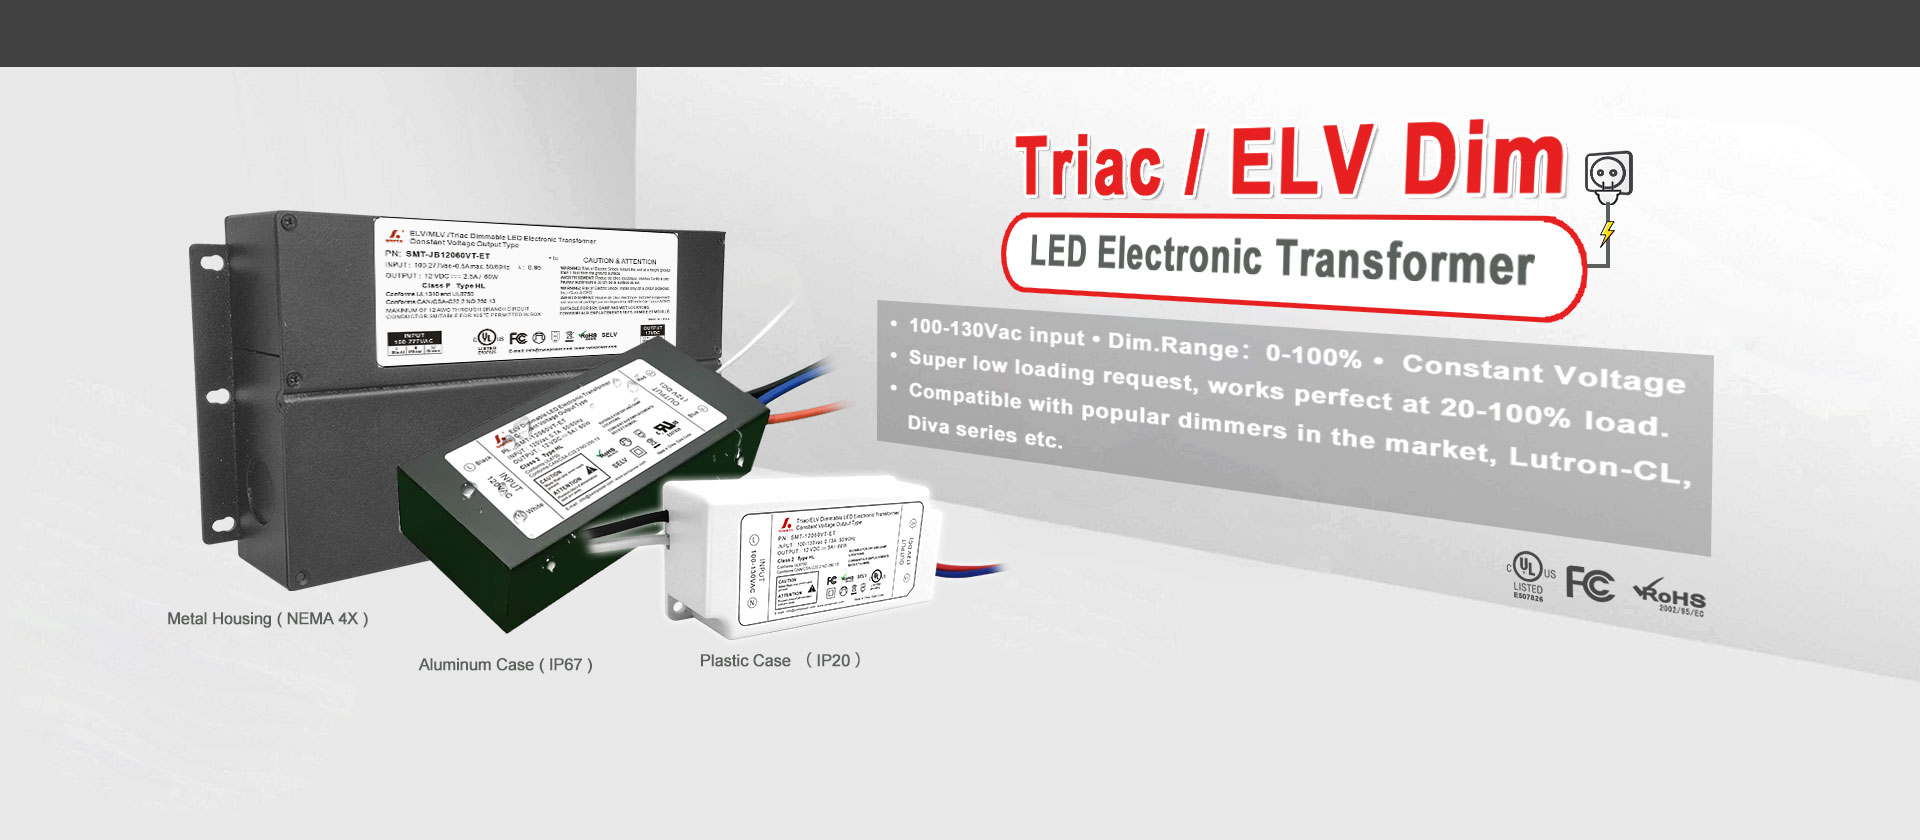 Triac/ELV Dimmable Constant voltage LED Electronic Transformer